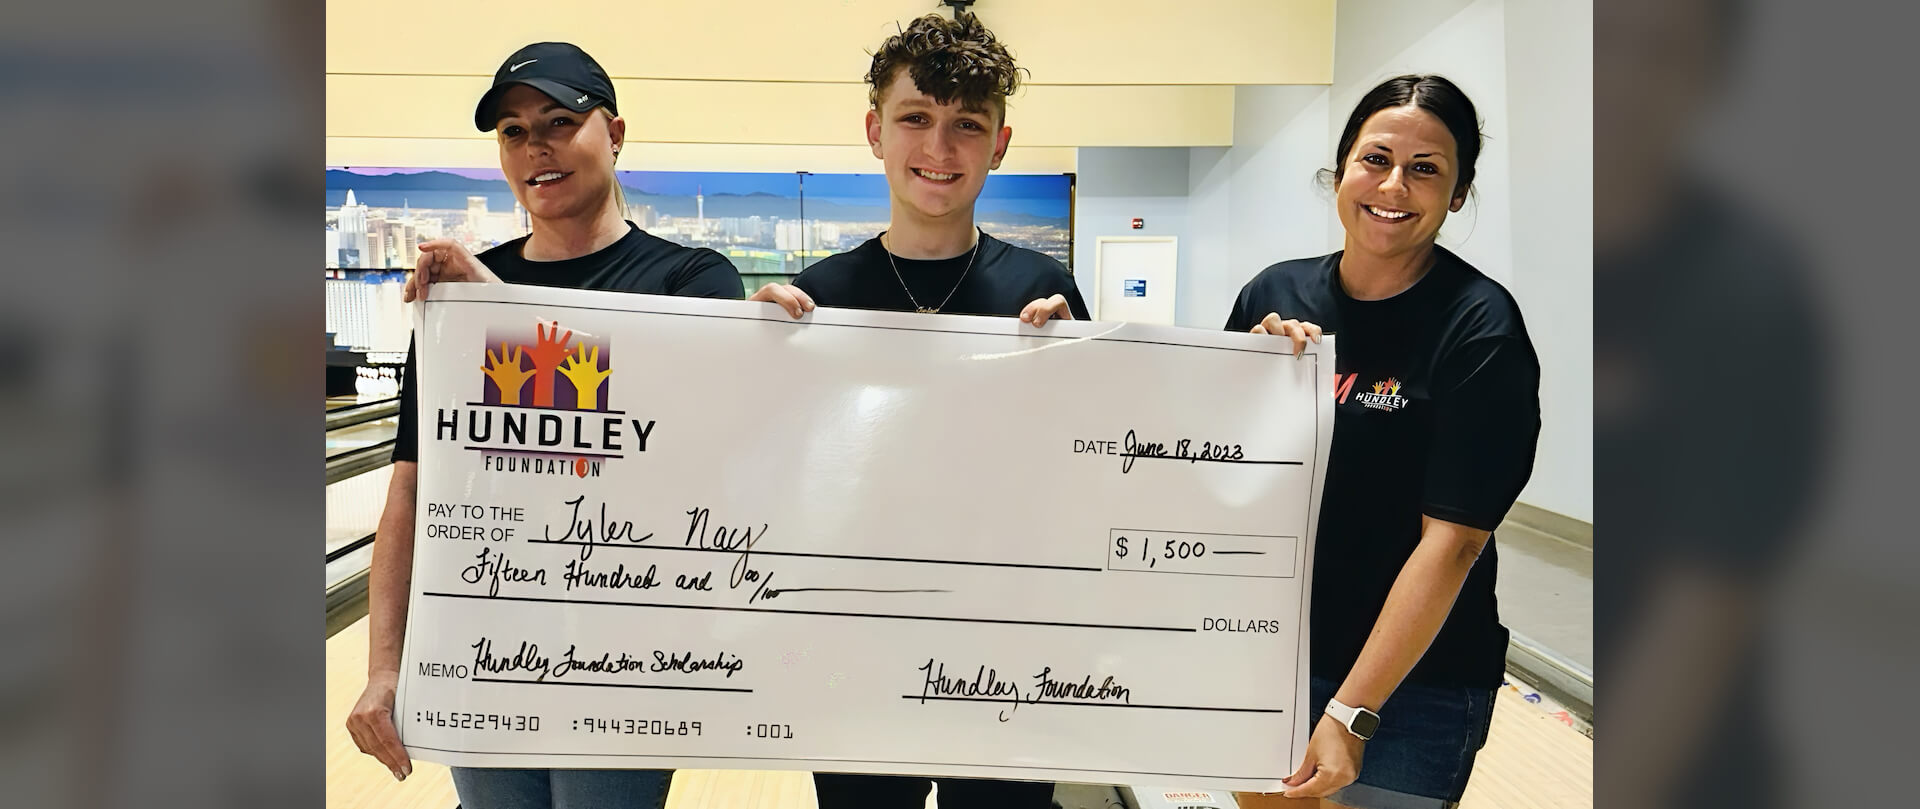 three members of "The Team" holding a giant check for $1,500